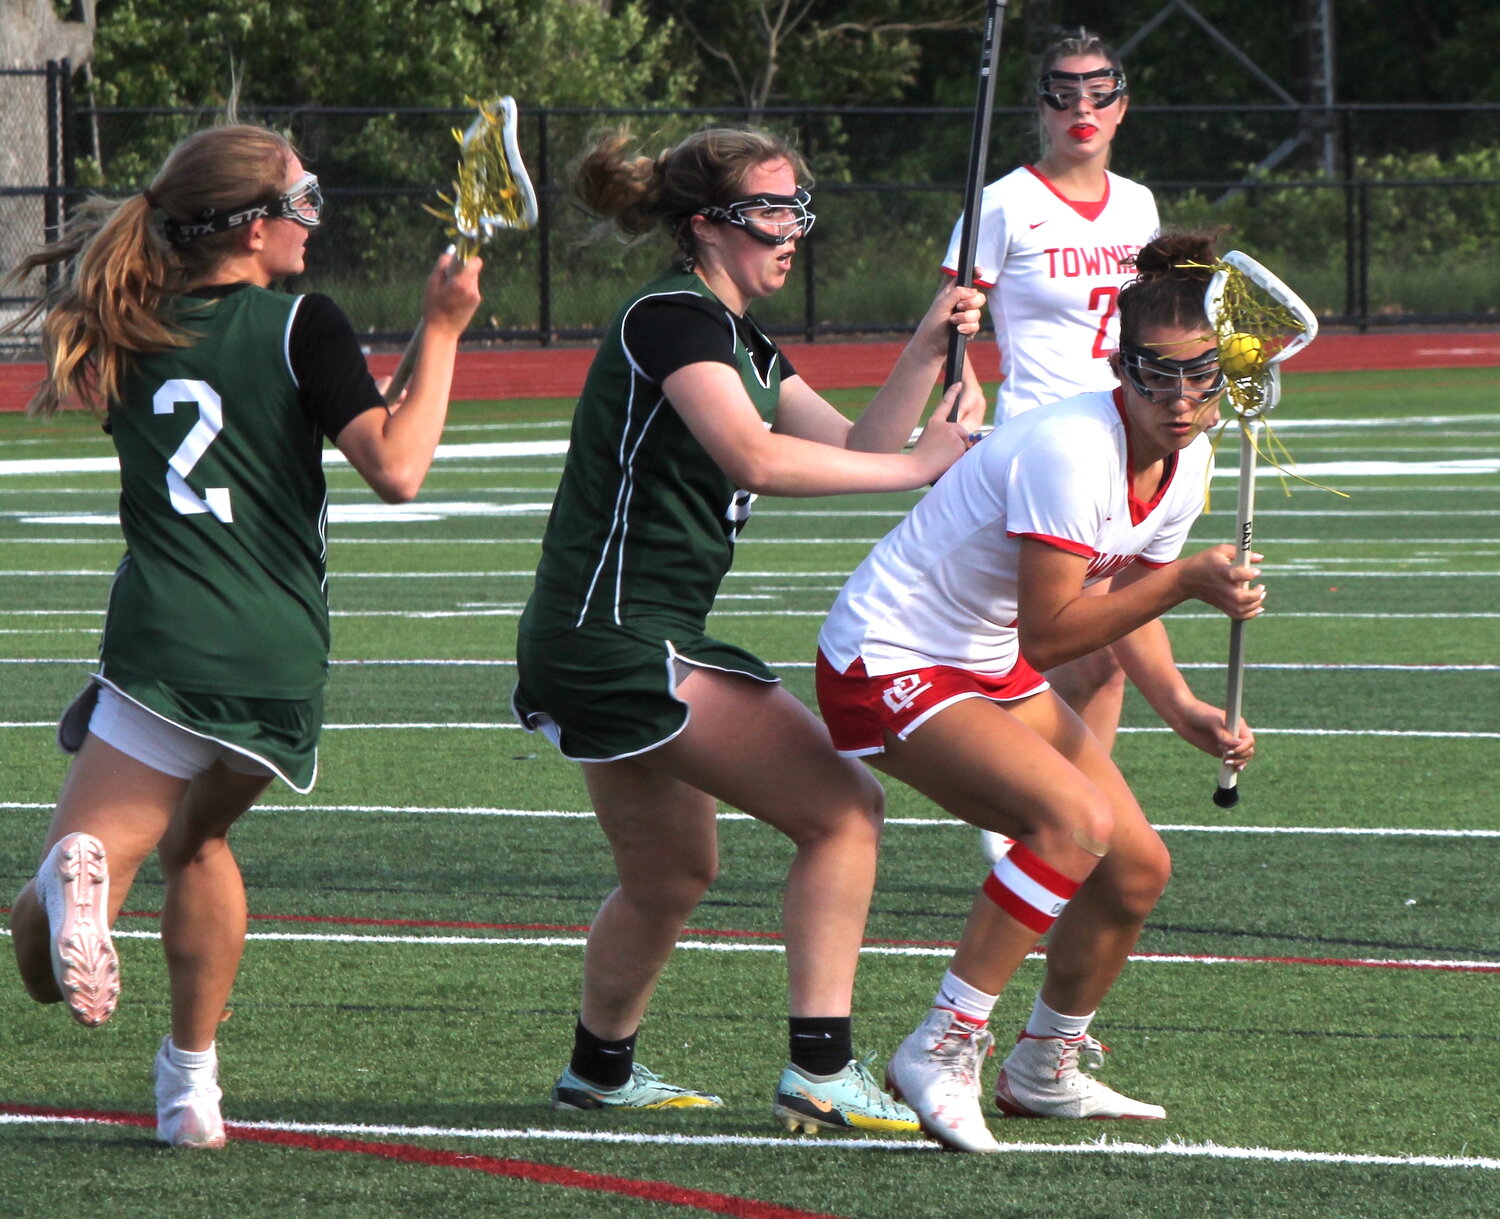 East Providence's Ryleigh Grant scored six times as the Townies defeated Cranston East 11-2 in the opening round of the 2023 Division III girls' lacrosse playoffs Thursday, May 25.